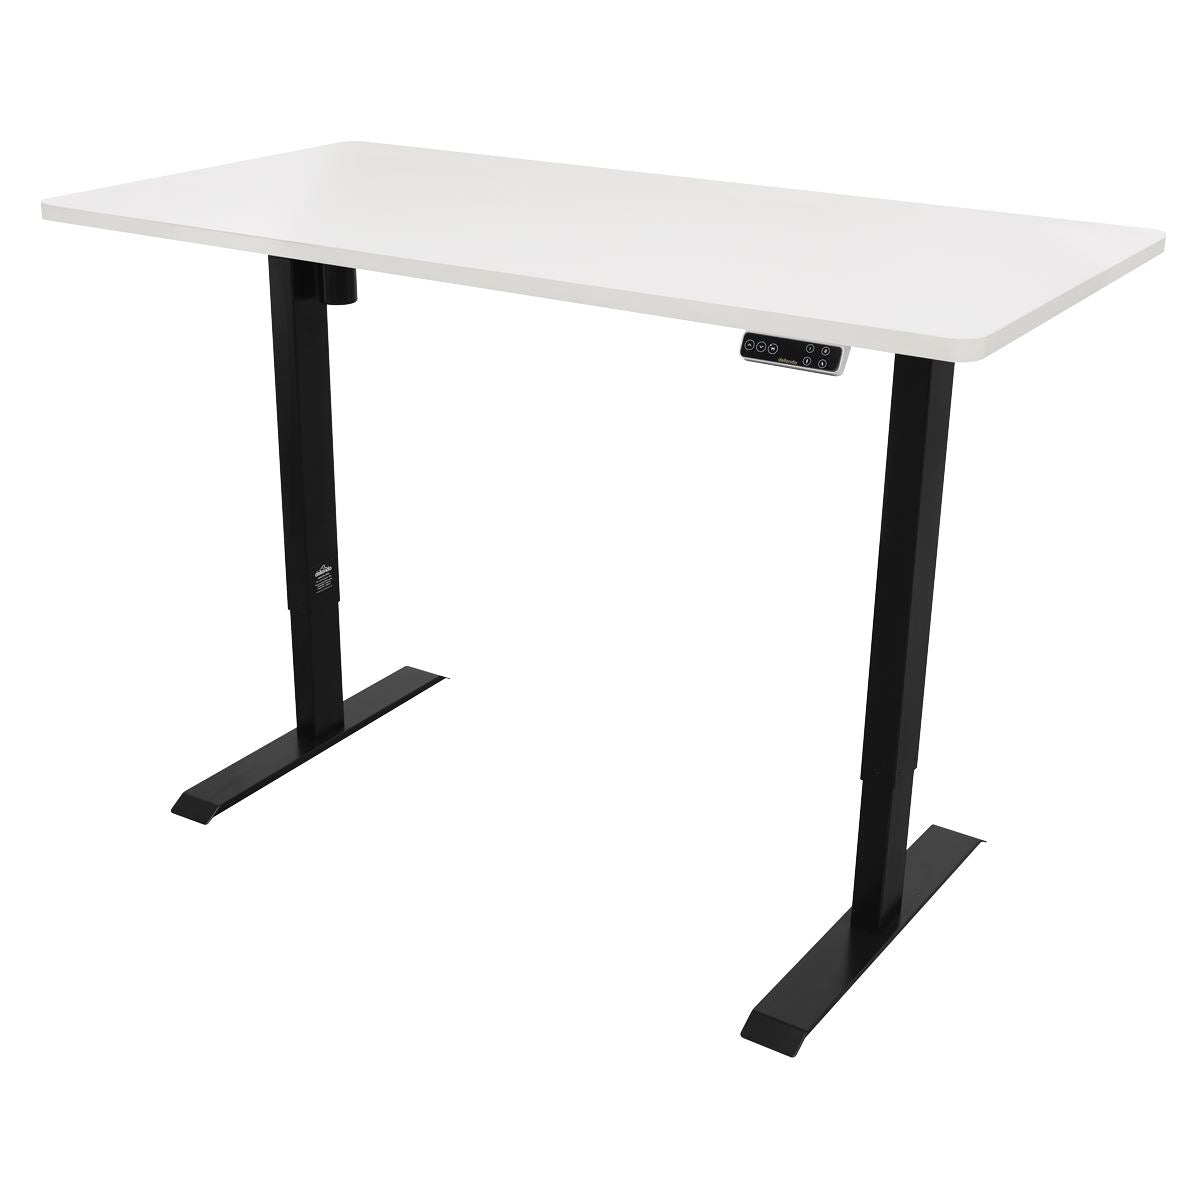 Dellonda White Electric Height Adjustable Standing Desk with Memory, Quiet, 1400x700mm